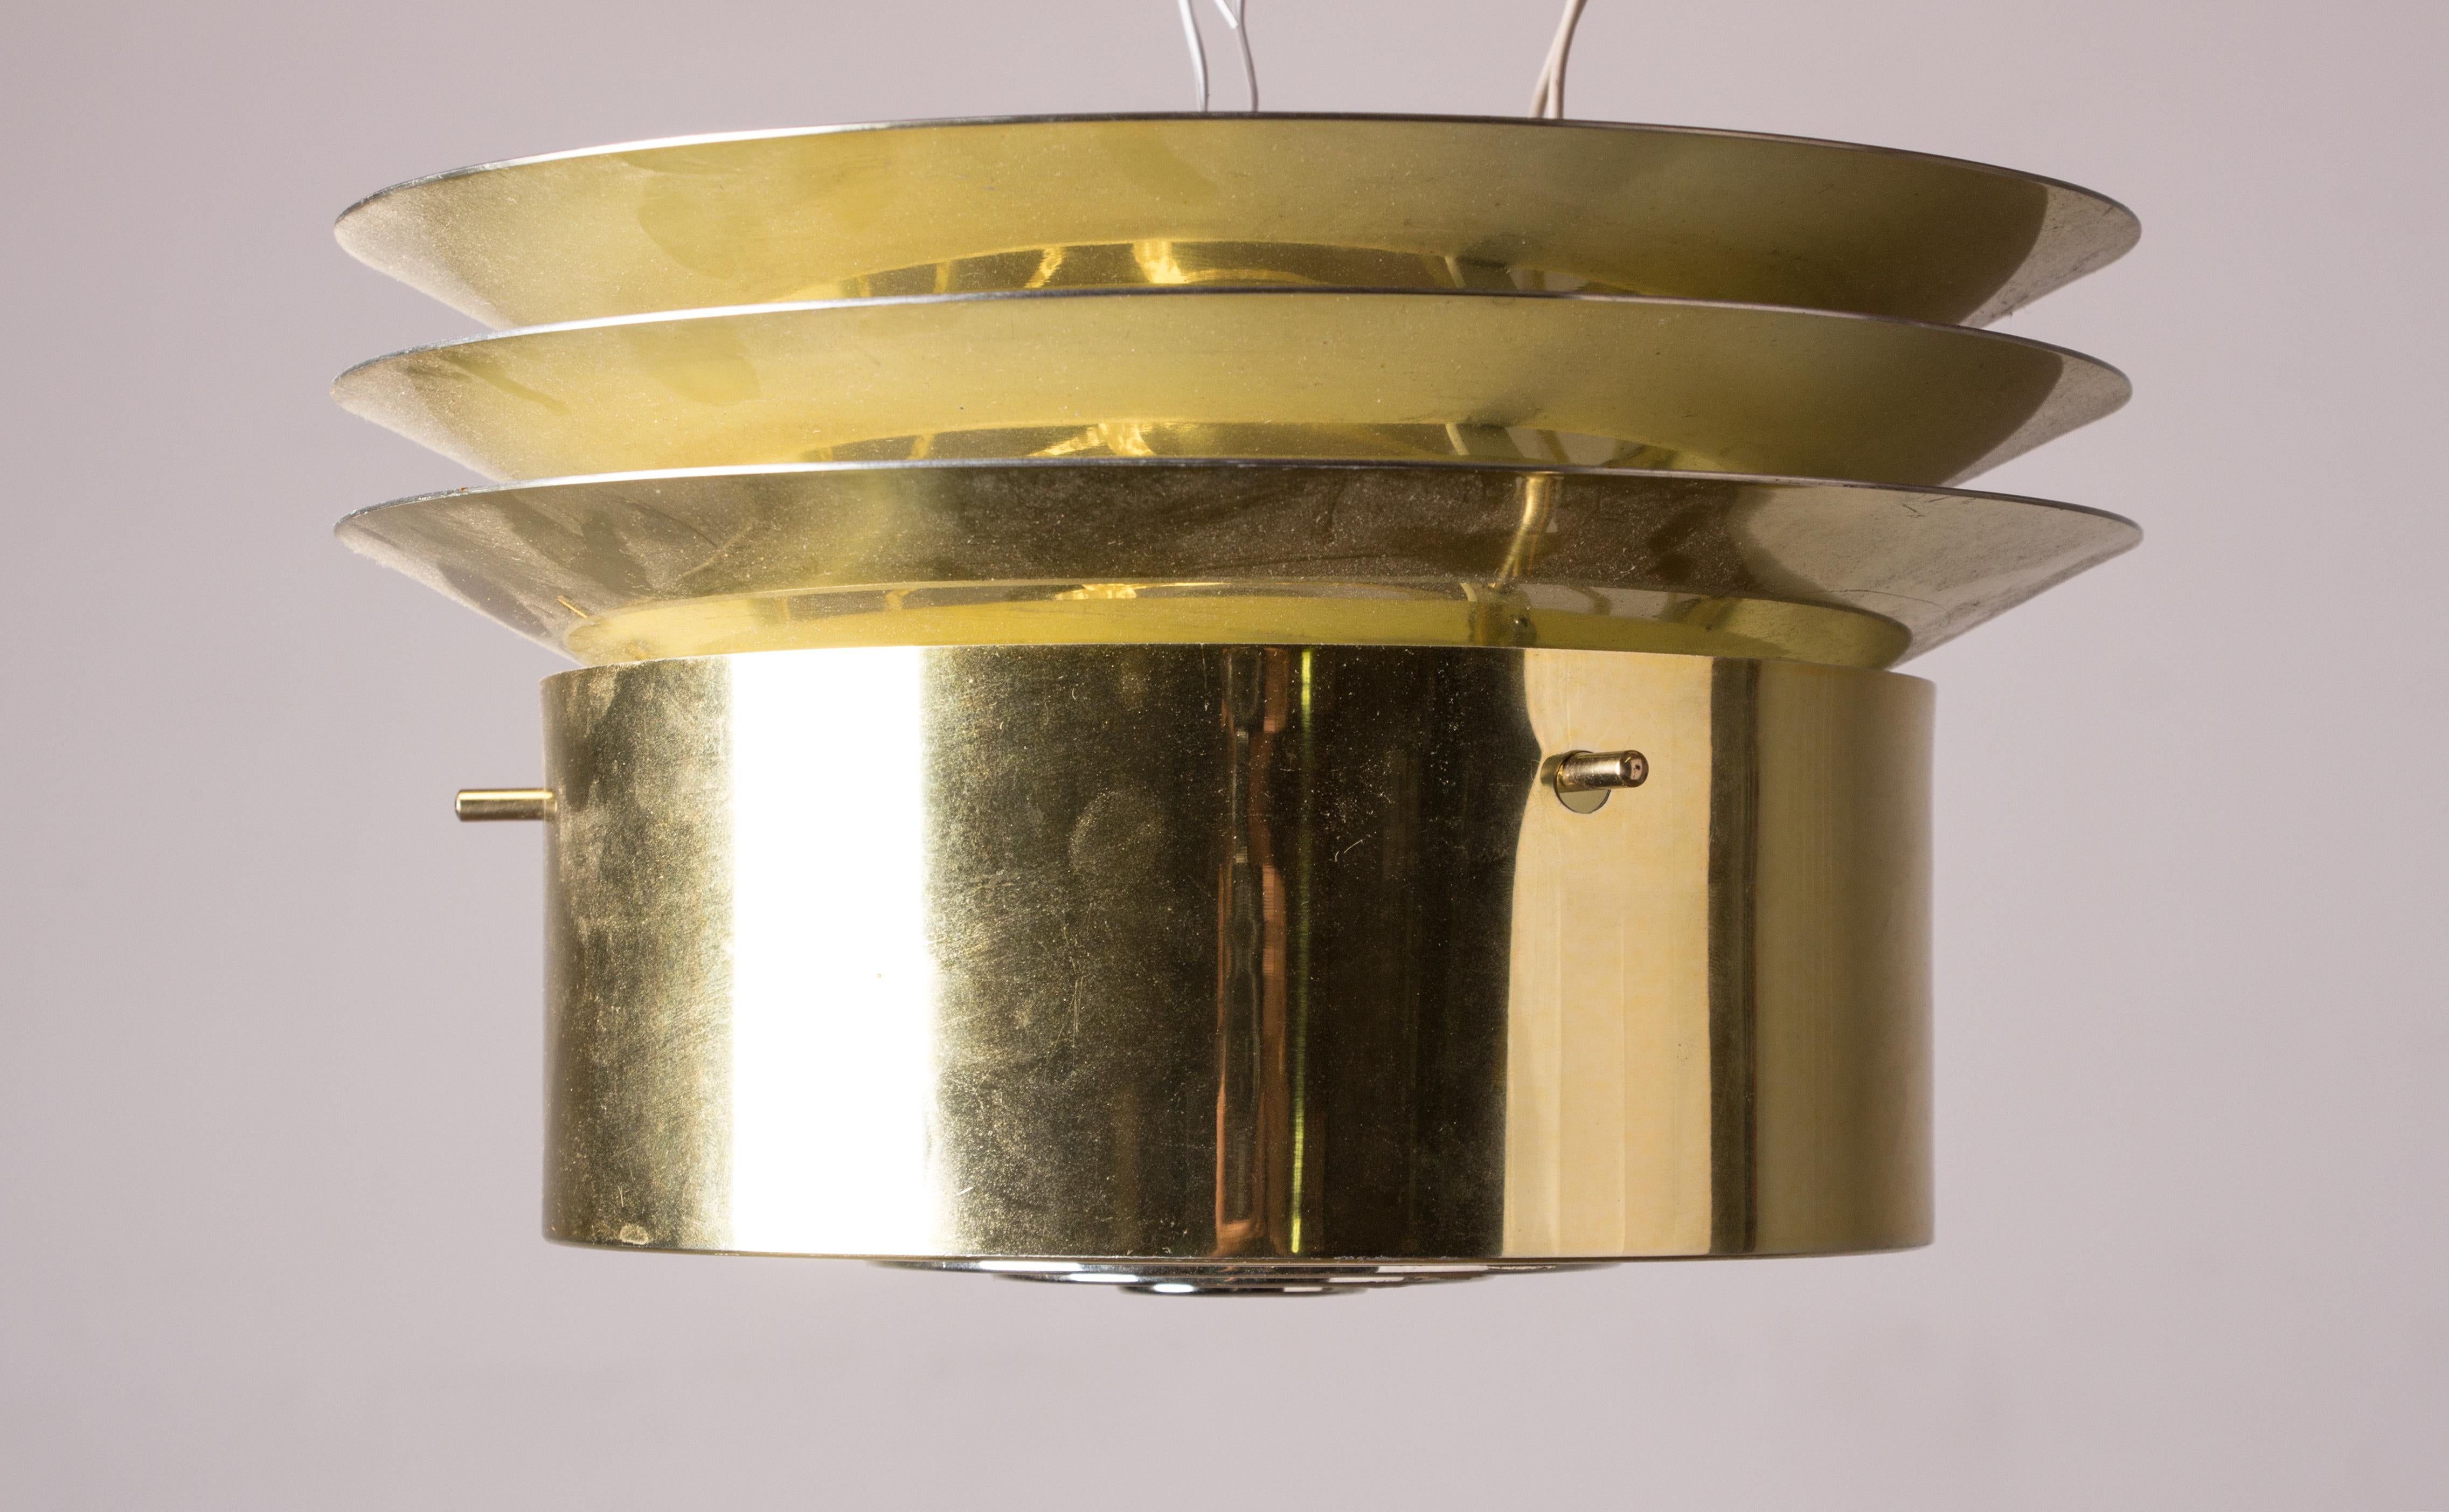 Superb Scandinavian Brass Pendant Lamp. Its structure composed of three metal circles and a grid gives it a remarkable appearance for both diffused and subdued light.